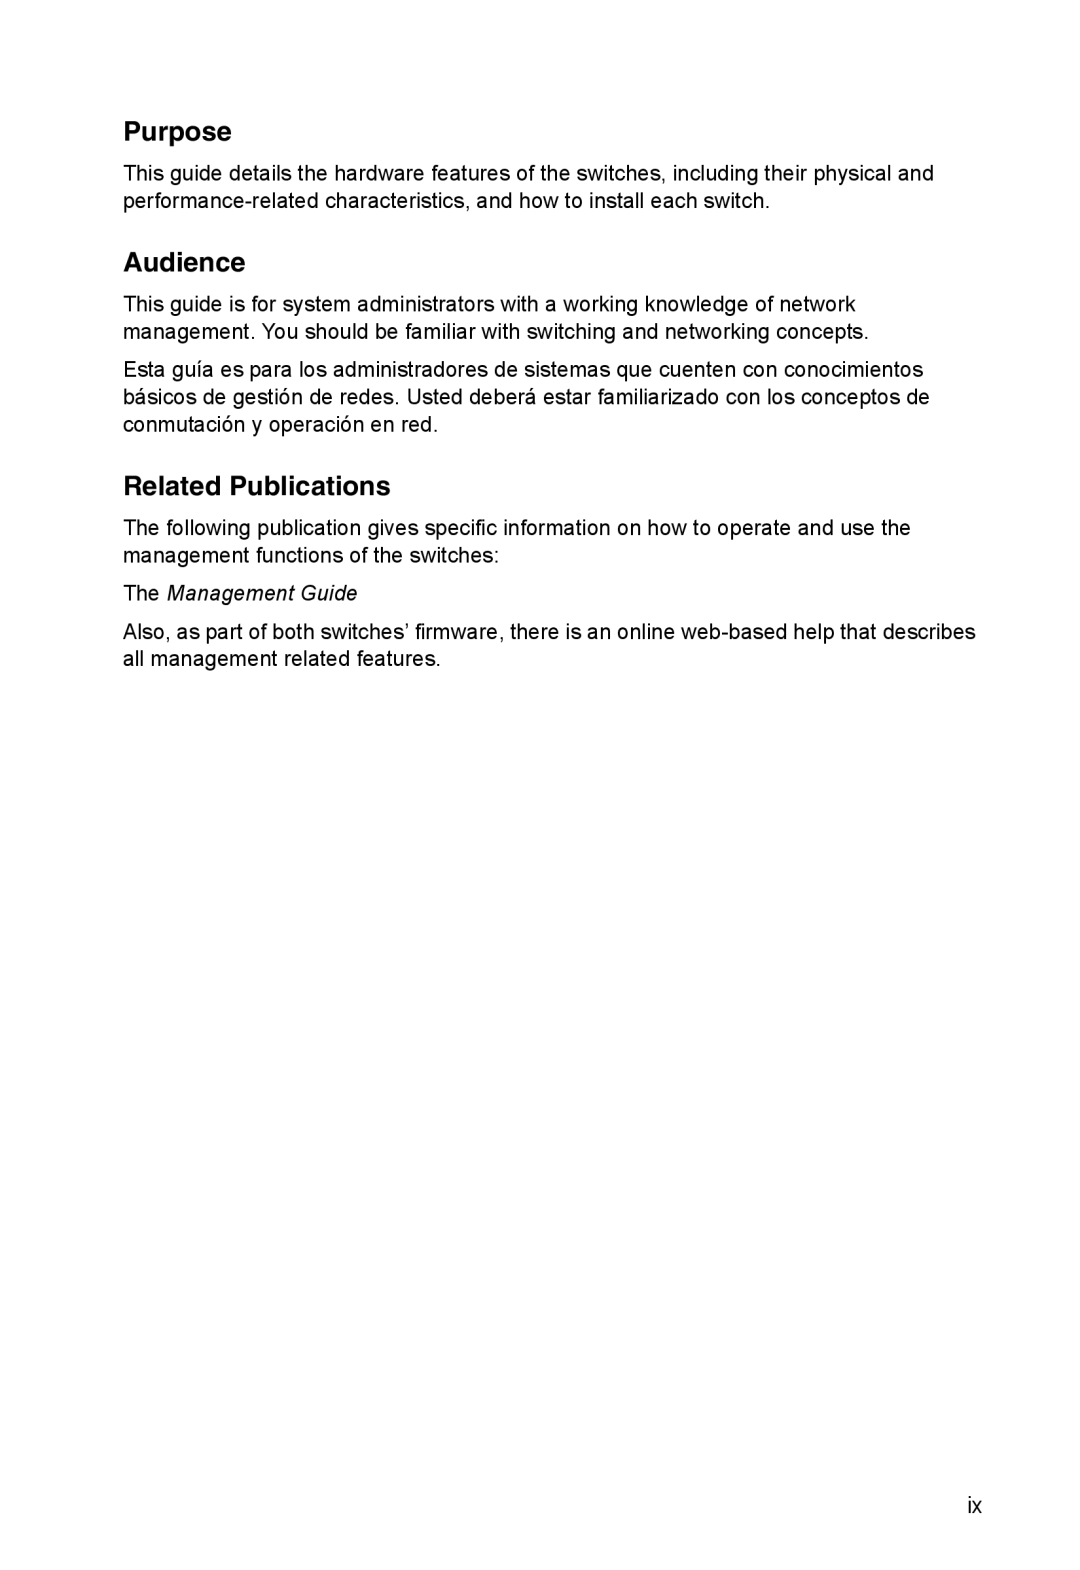 SMC Networks SMC8126PL2-F manual Purpose, Audience, Related Publications, The Management Guide 